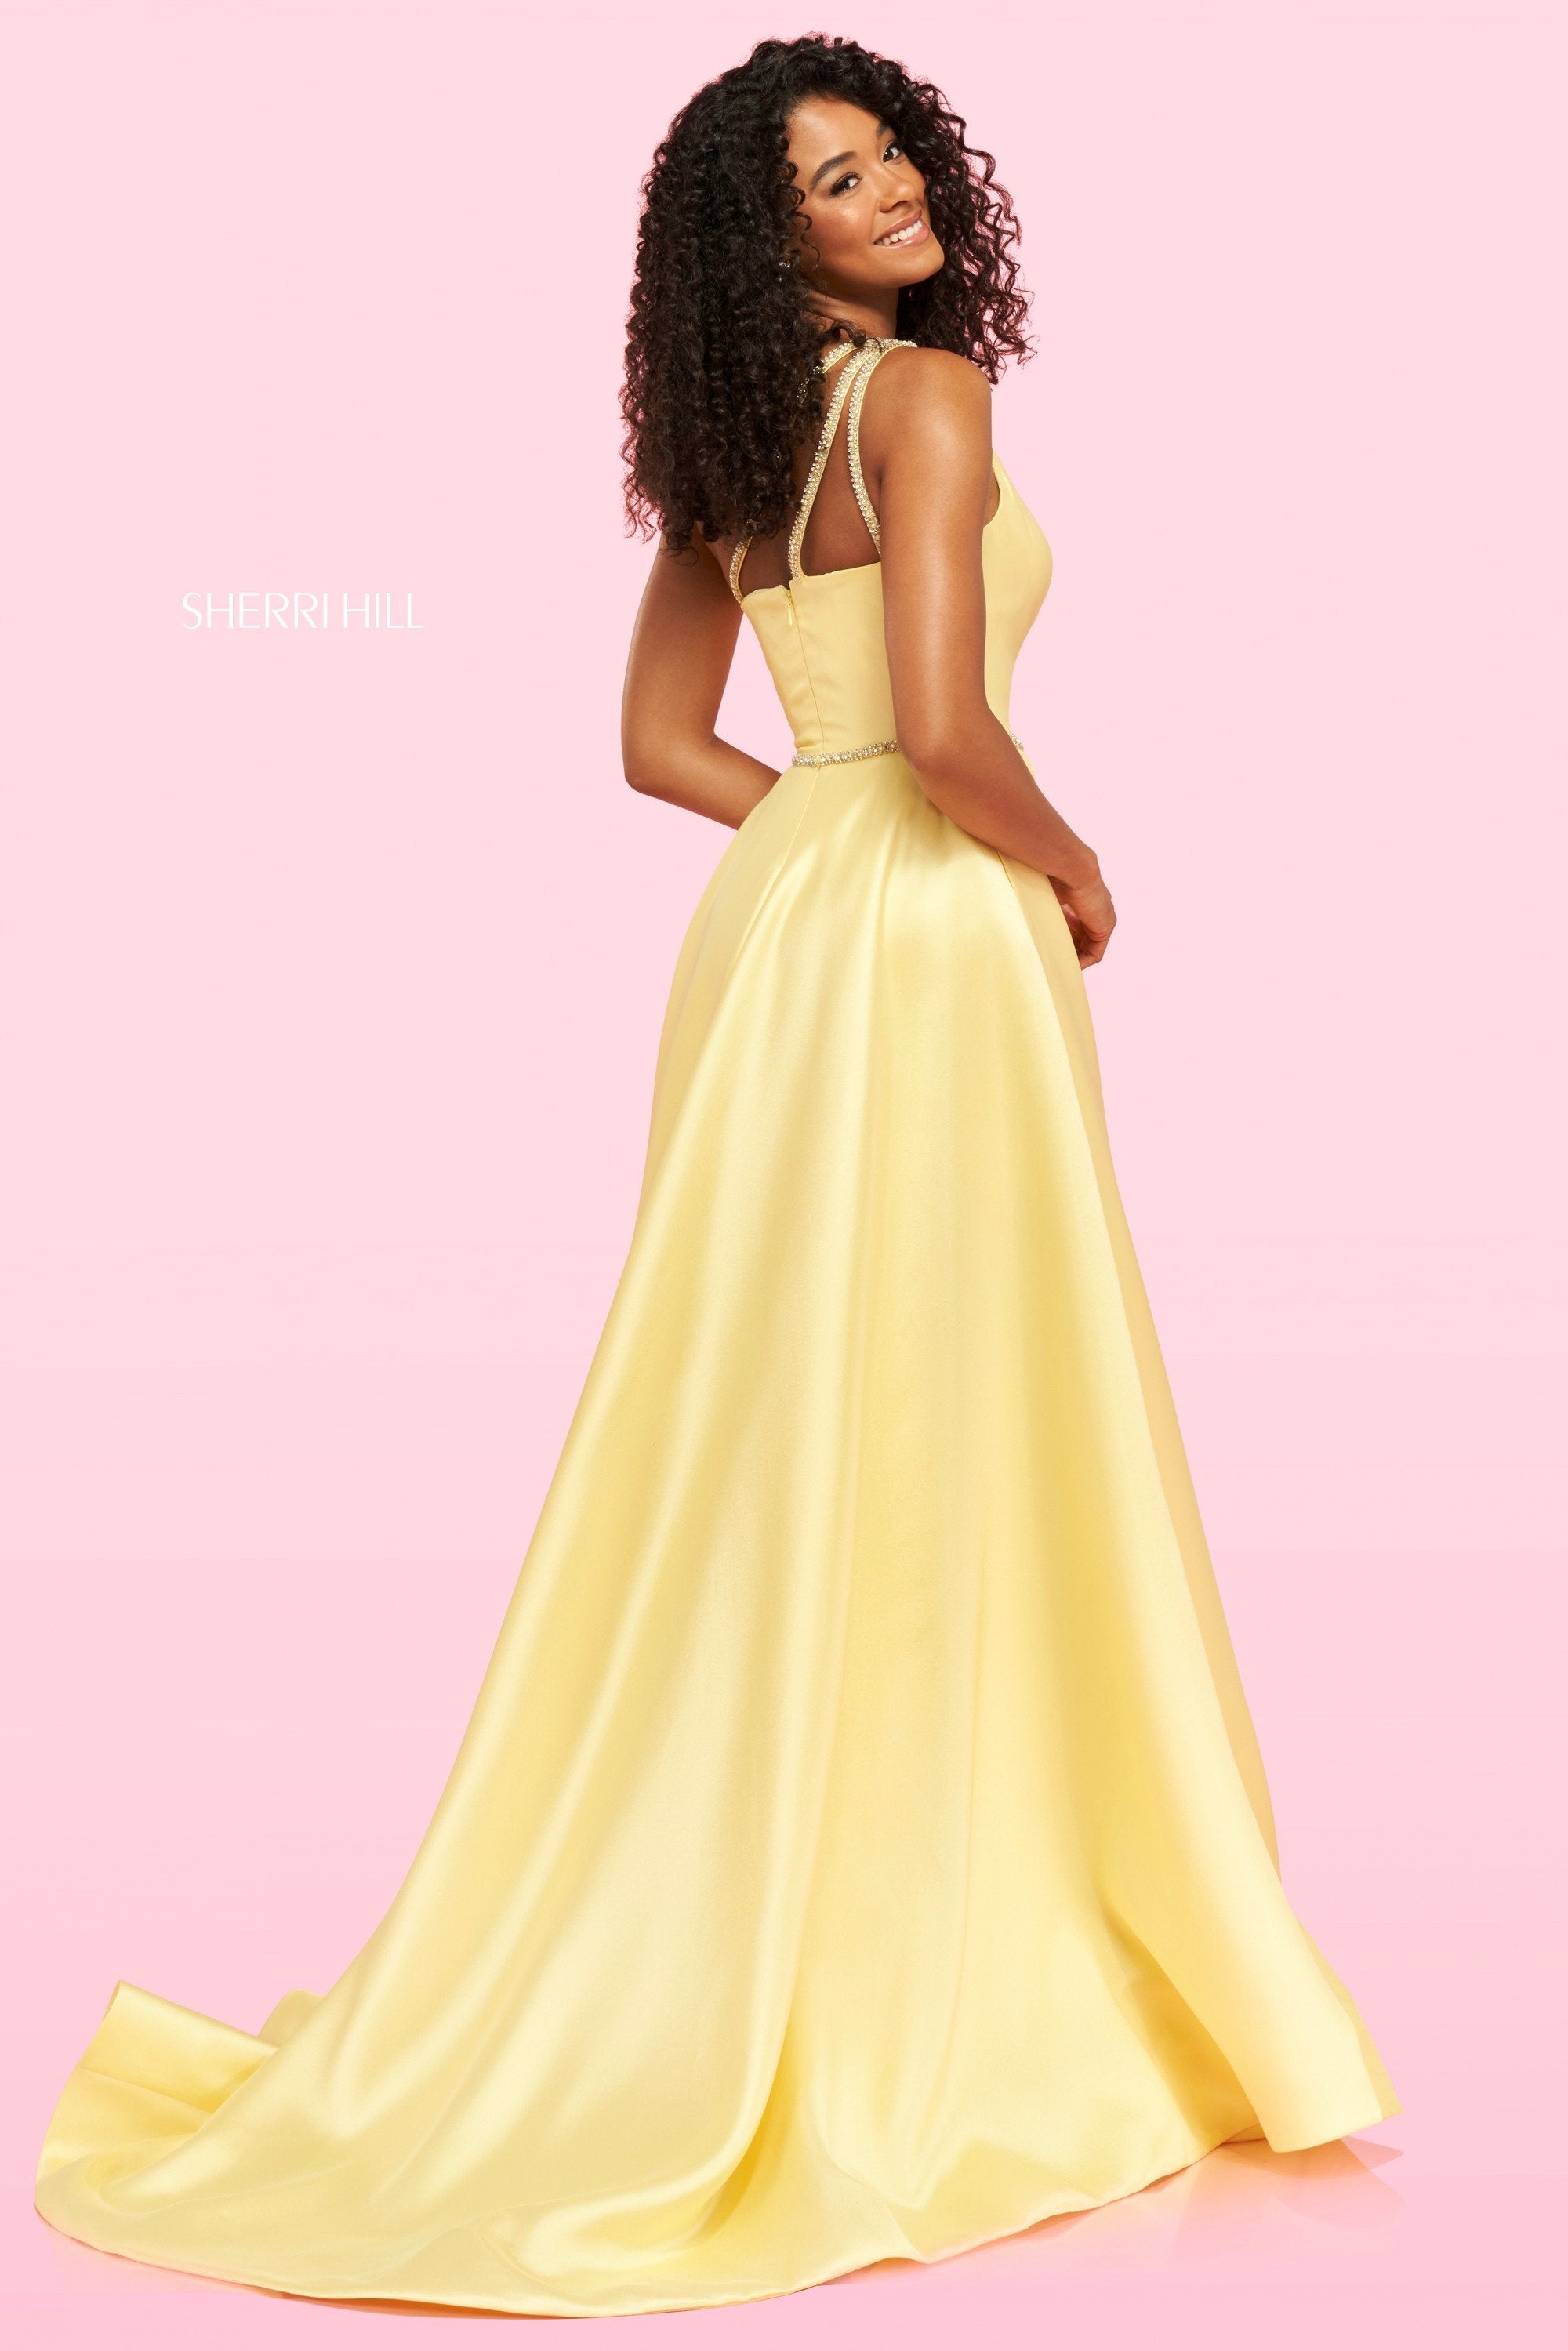 Sherri Hill 54242 dress images in these colors: Black, Yellow, Pink, Lilac, Red.